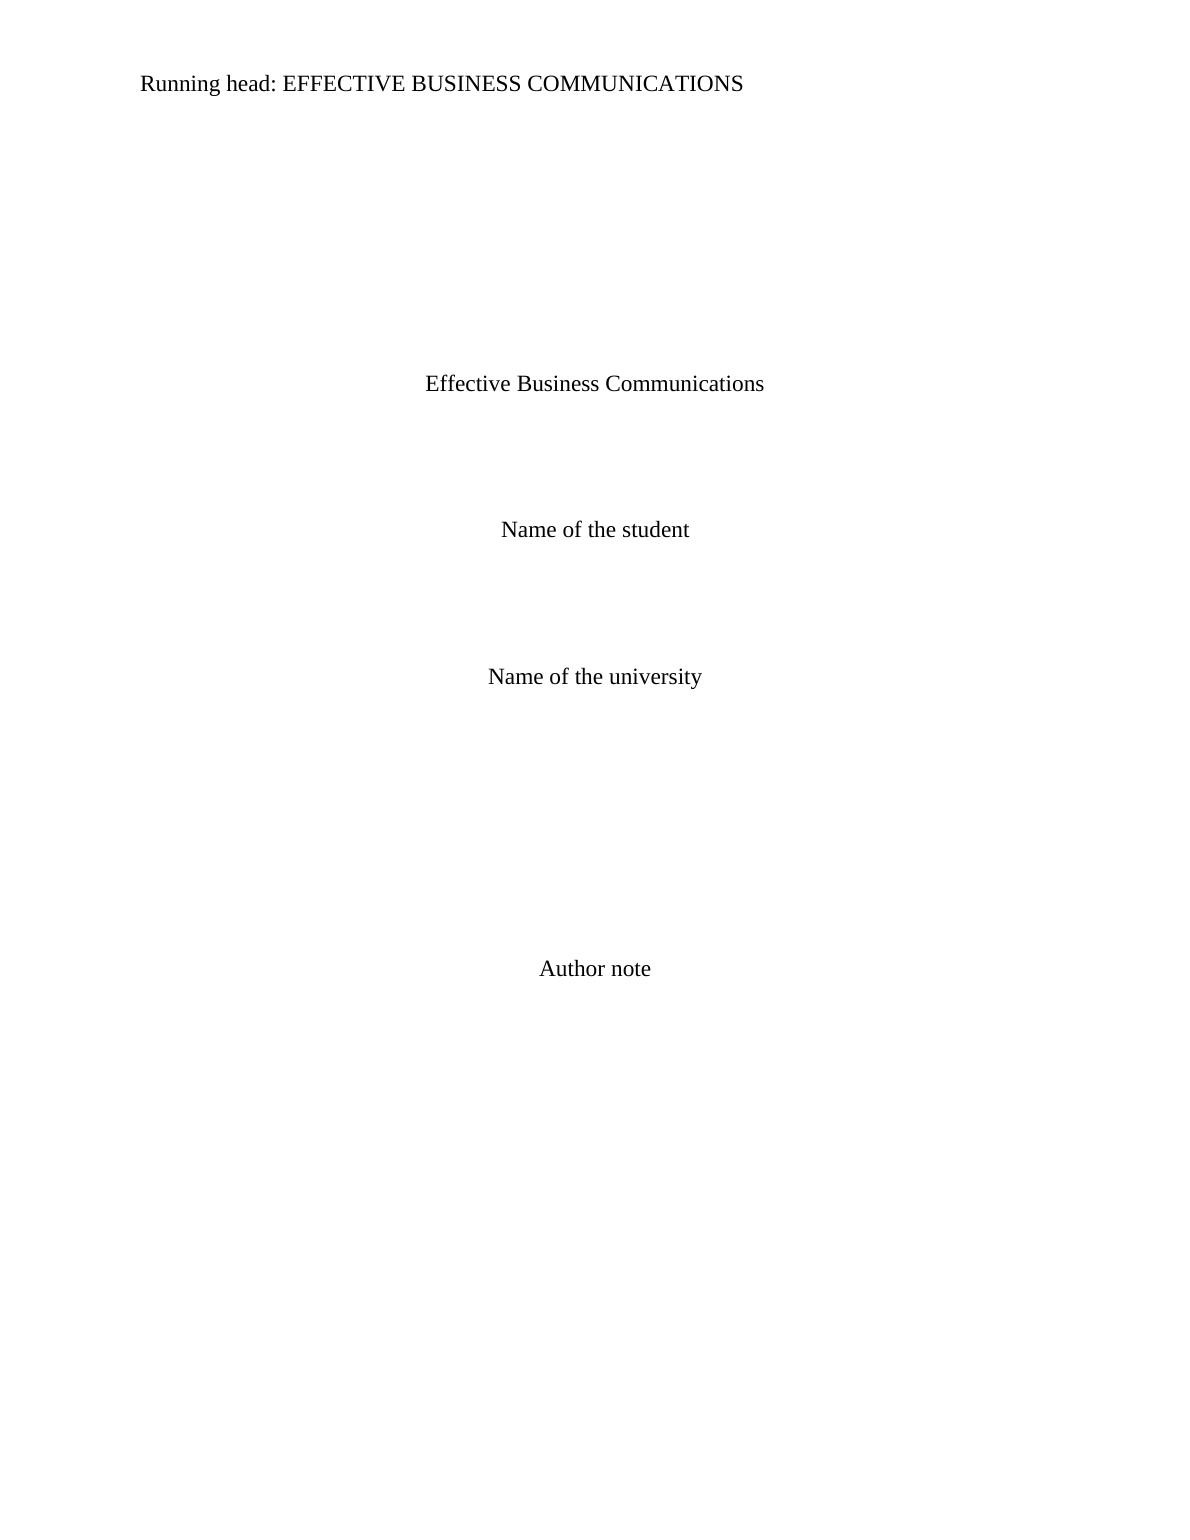 Effective Business Communication: Report_1